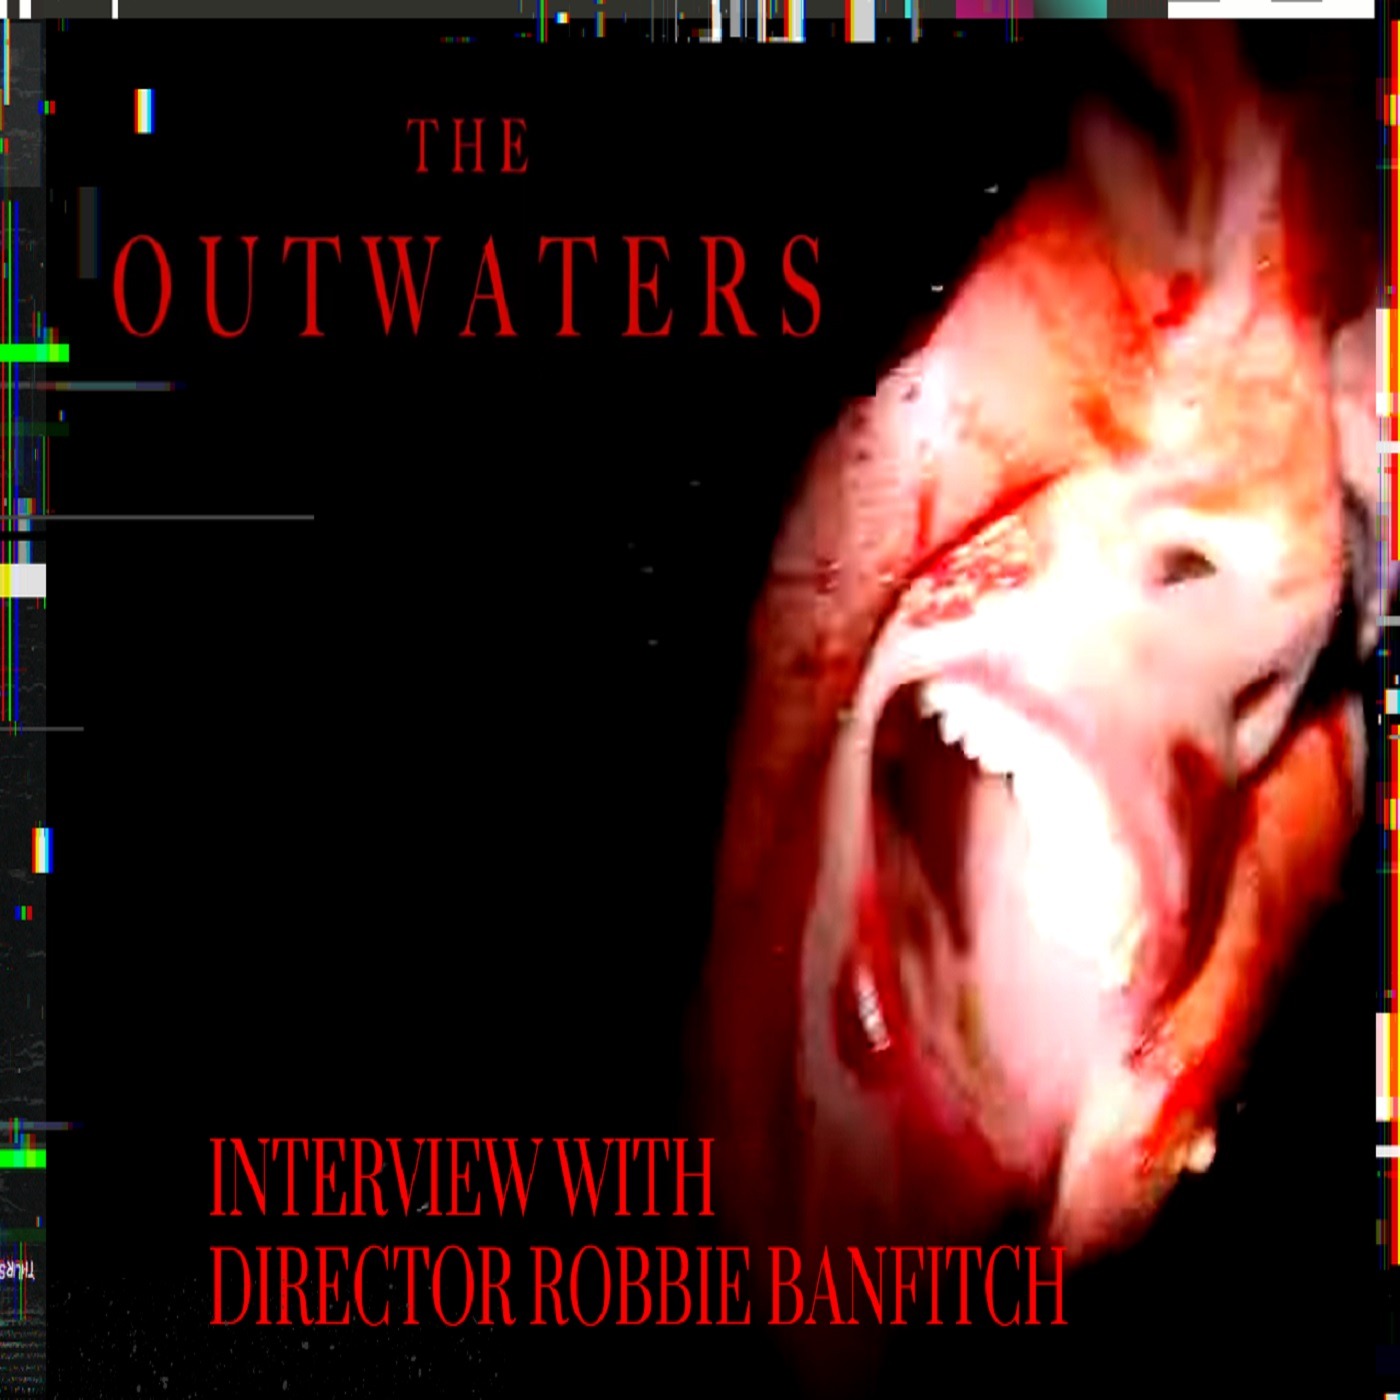 'THE OUTWATERS' Director Robbie Banfitch Interview